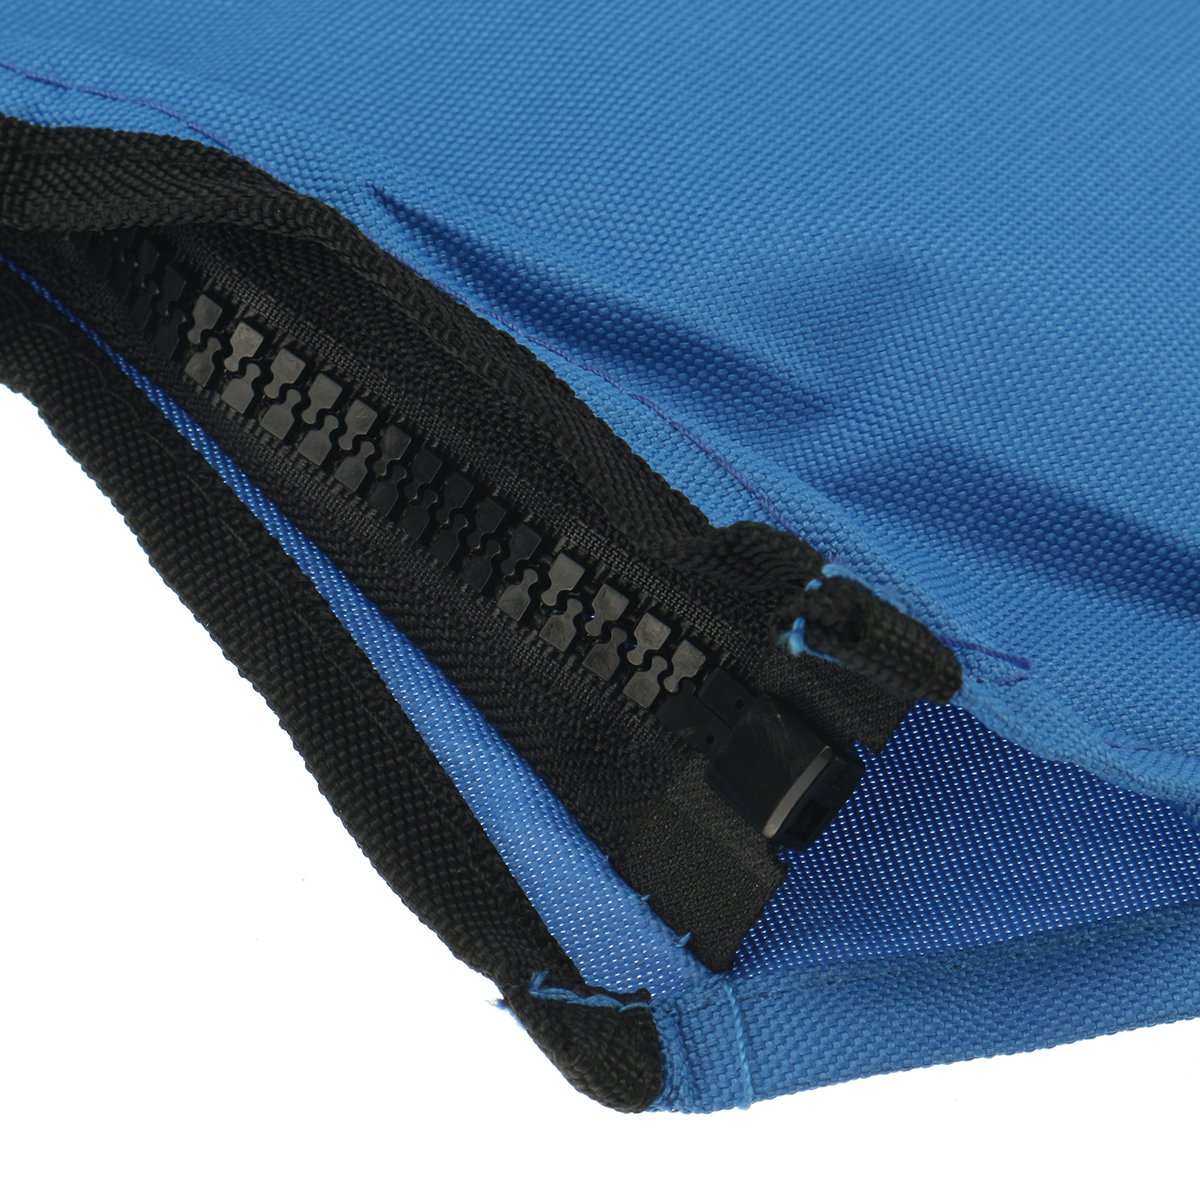 Blue 4 Bow 600D Bimini Top Boot Cover Marine Boat Shade Canopy Yacht Roof Tarpaulin Dust Cover With Zipper